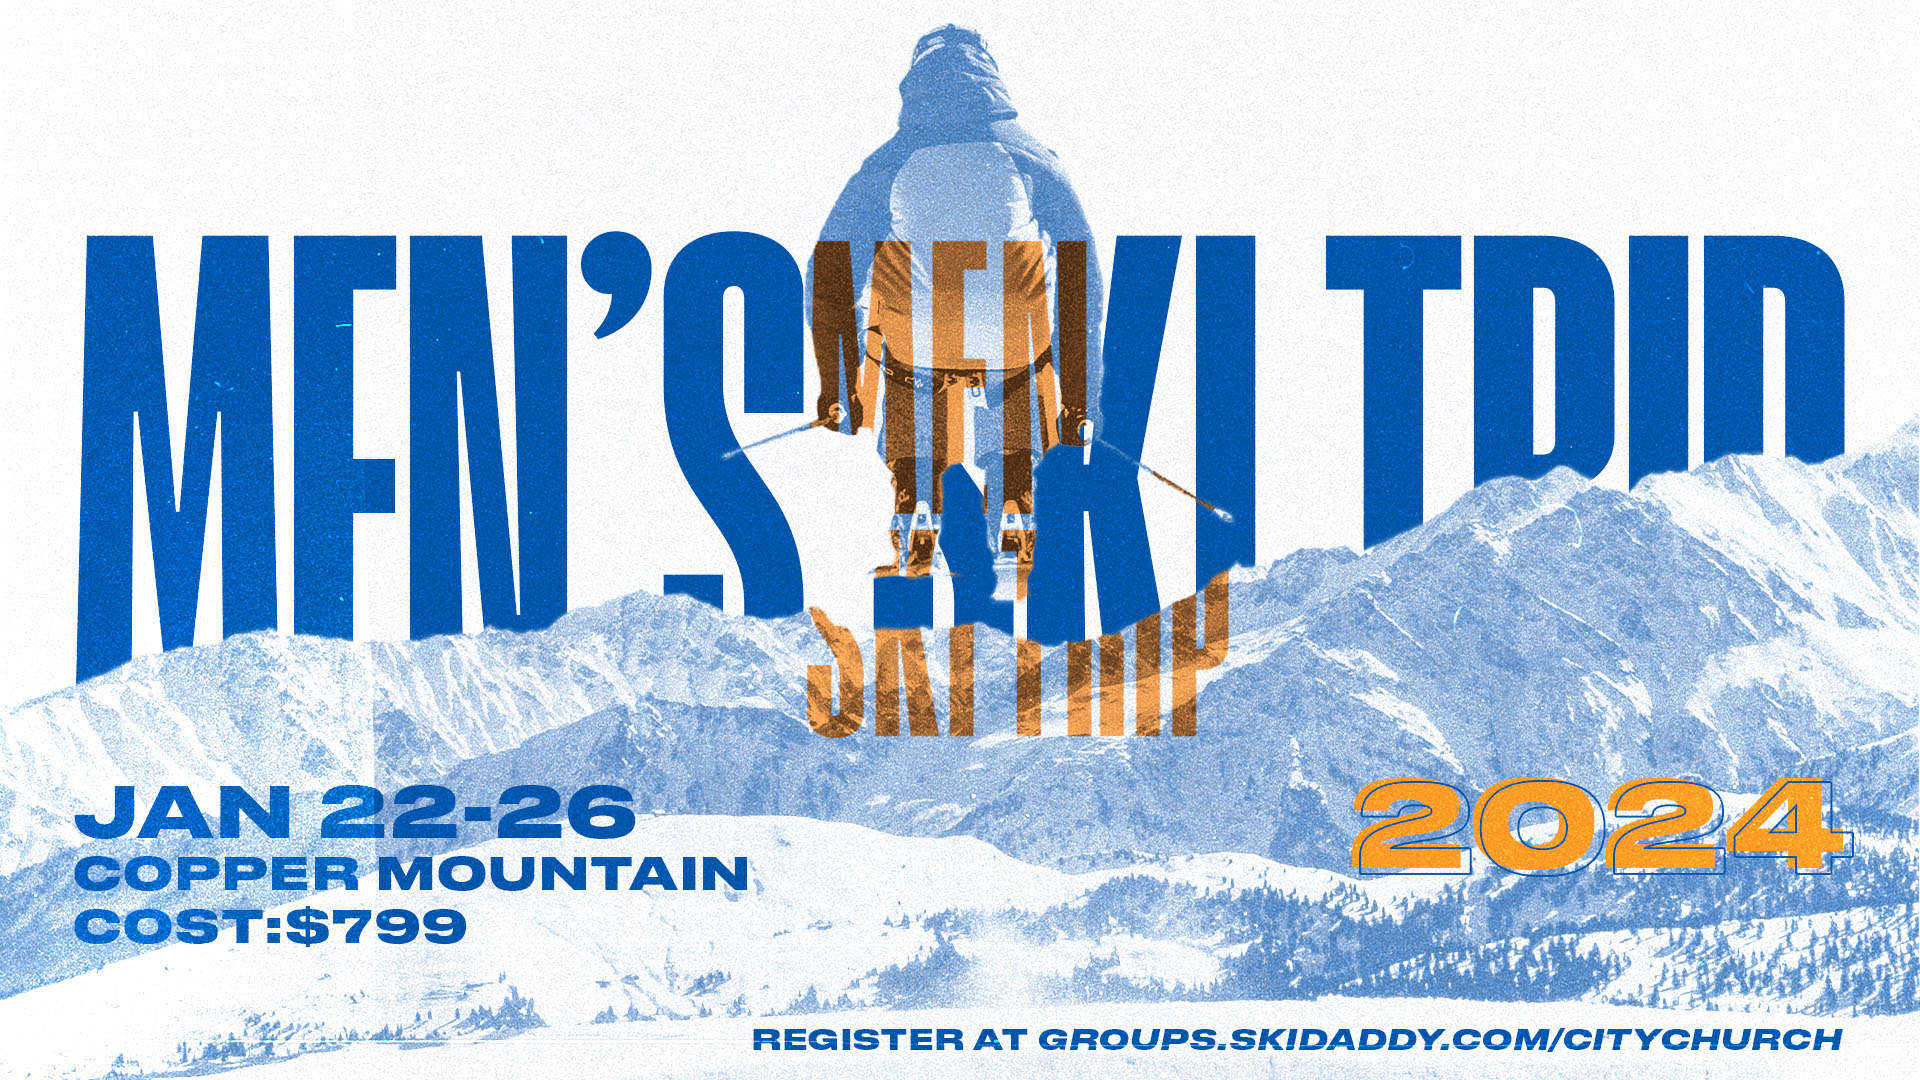 Men! Our annual Ski Trip is coming BACK in January 2024! <a href="https://www.groups.skidaddy.com/citychurch">SIGN UP NOW for this awesome event!</a> 